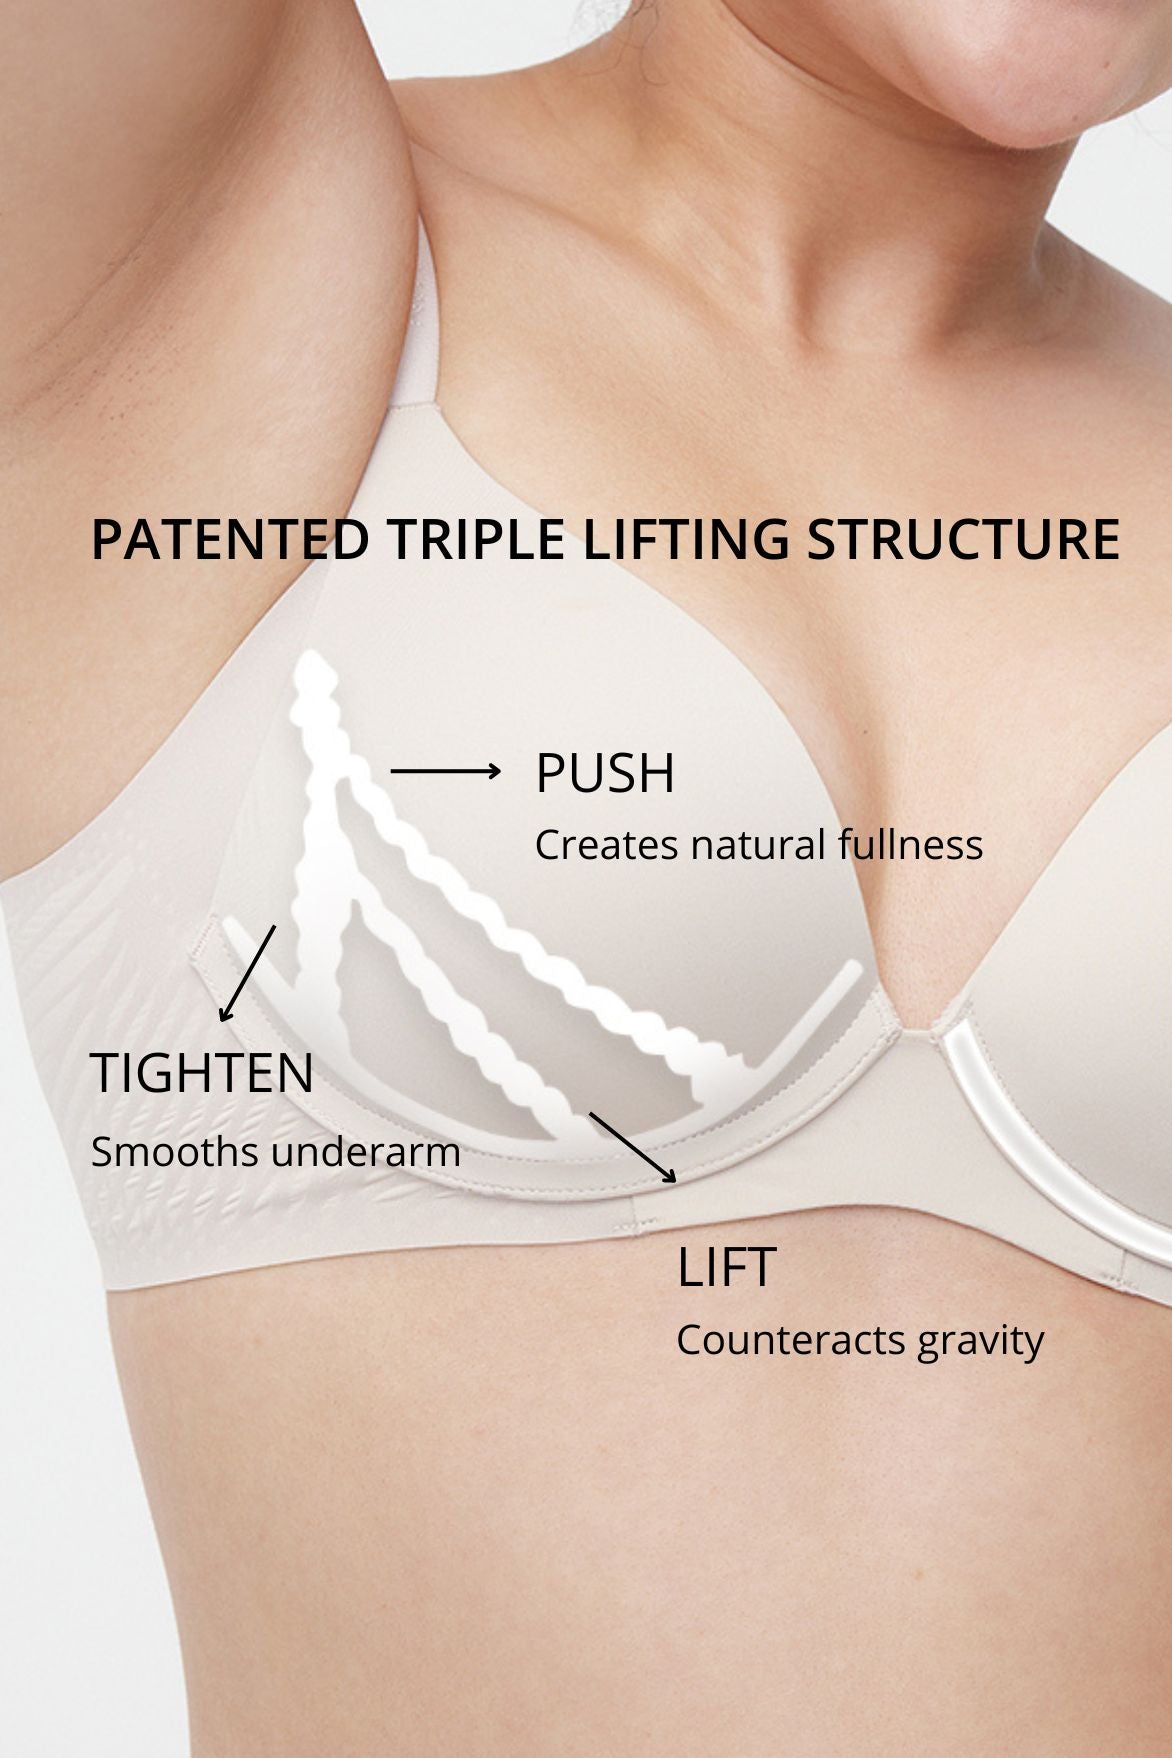 Patented triple lifting structure: Push, Tighten, and Lift